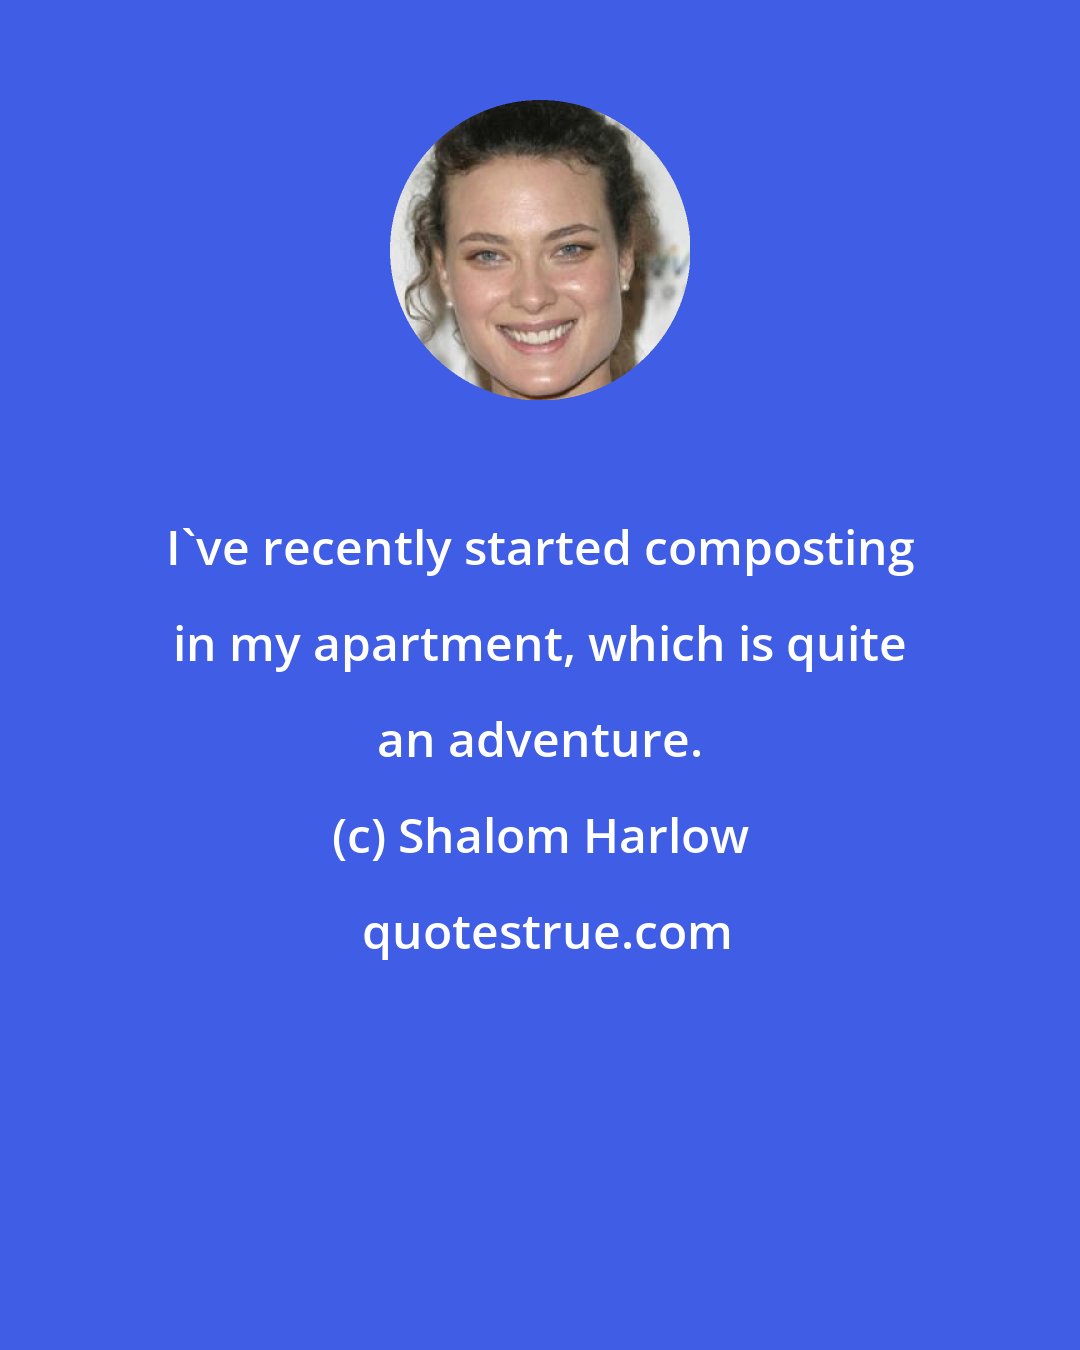 Shalom Harlow: I've recently started composting in my apartment, which is quite an adventure.